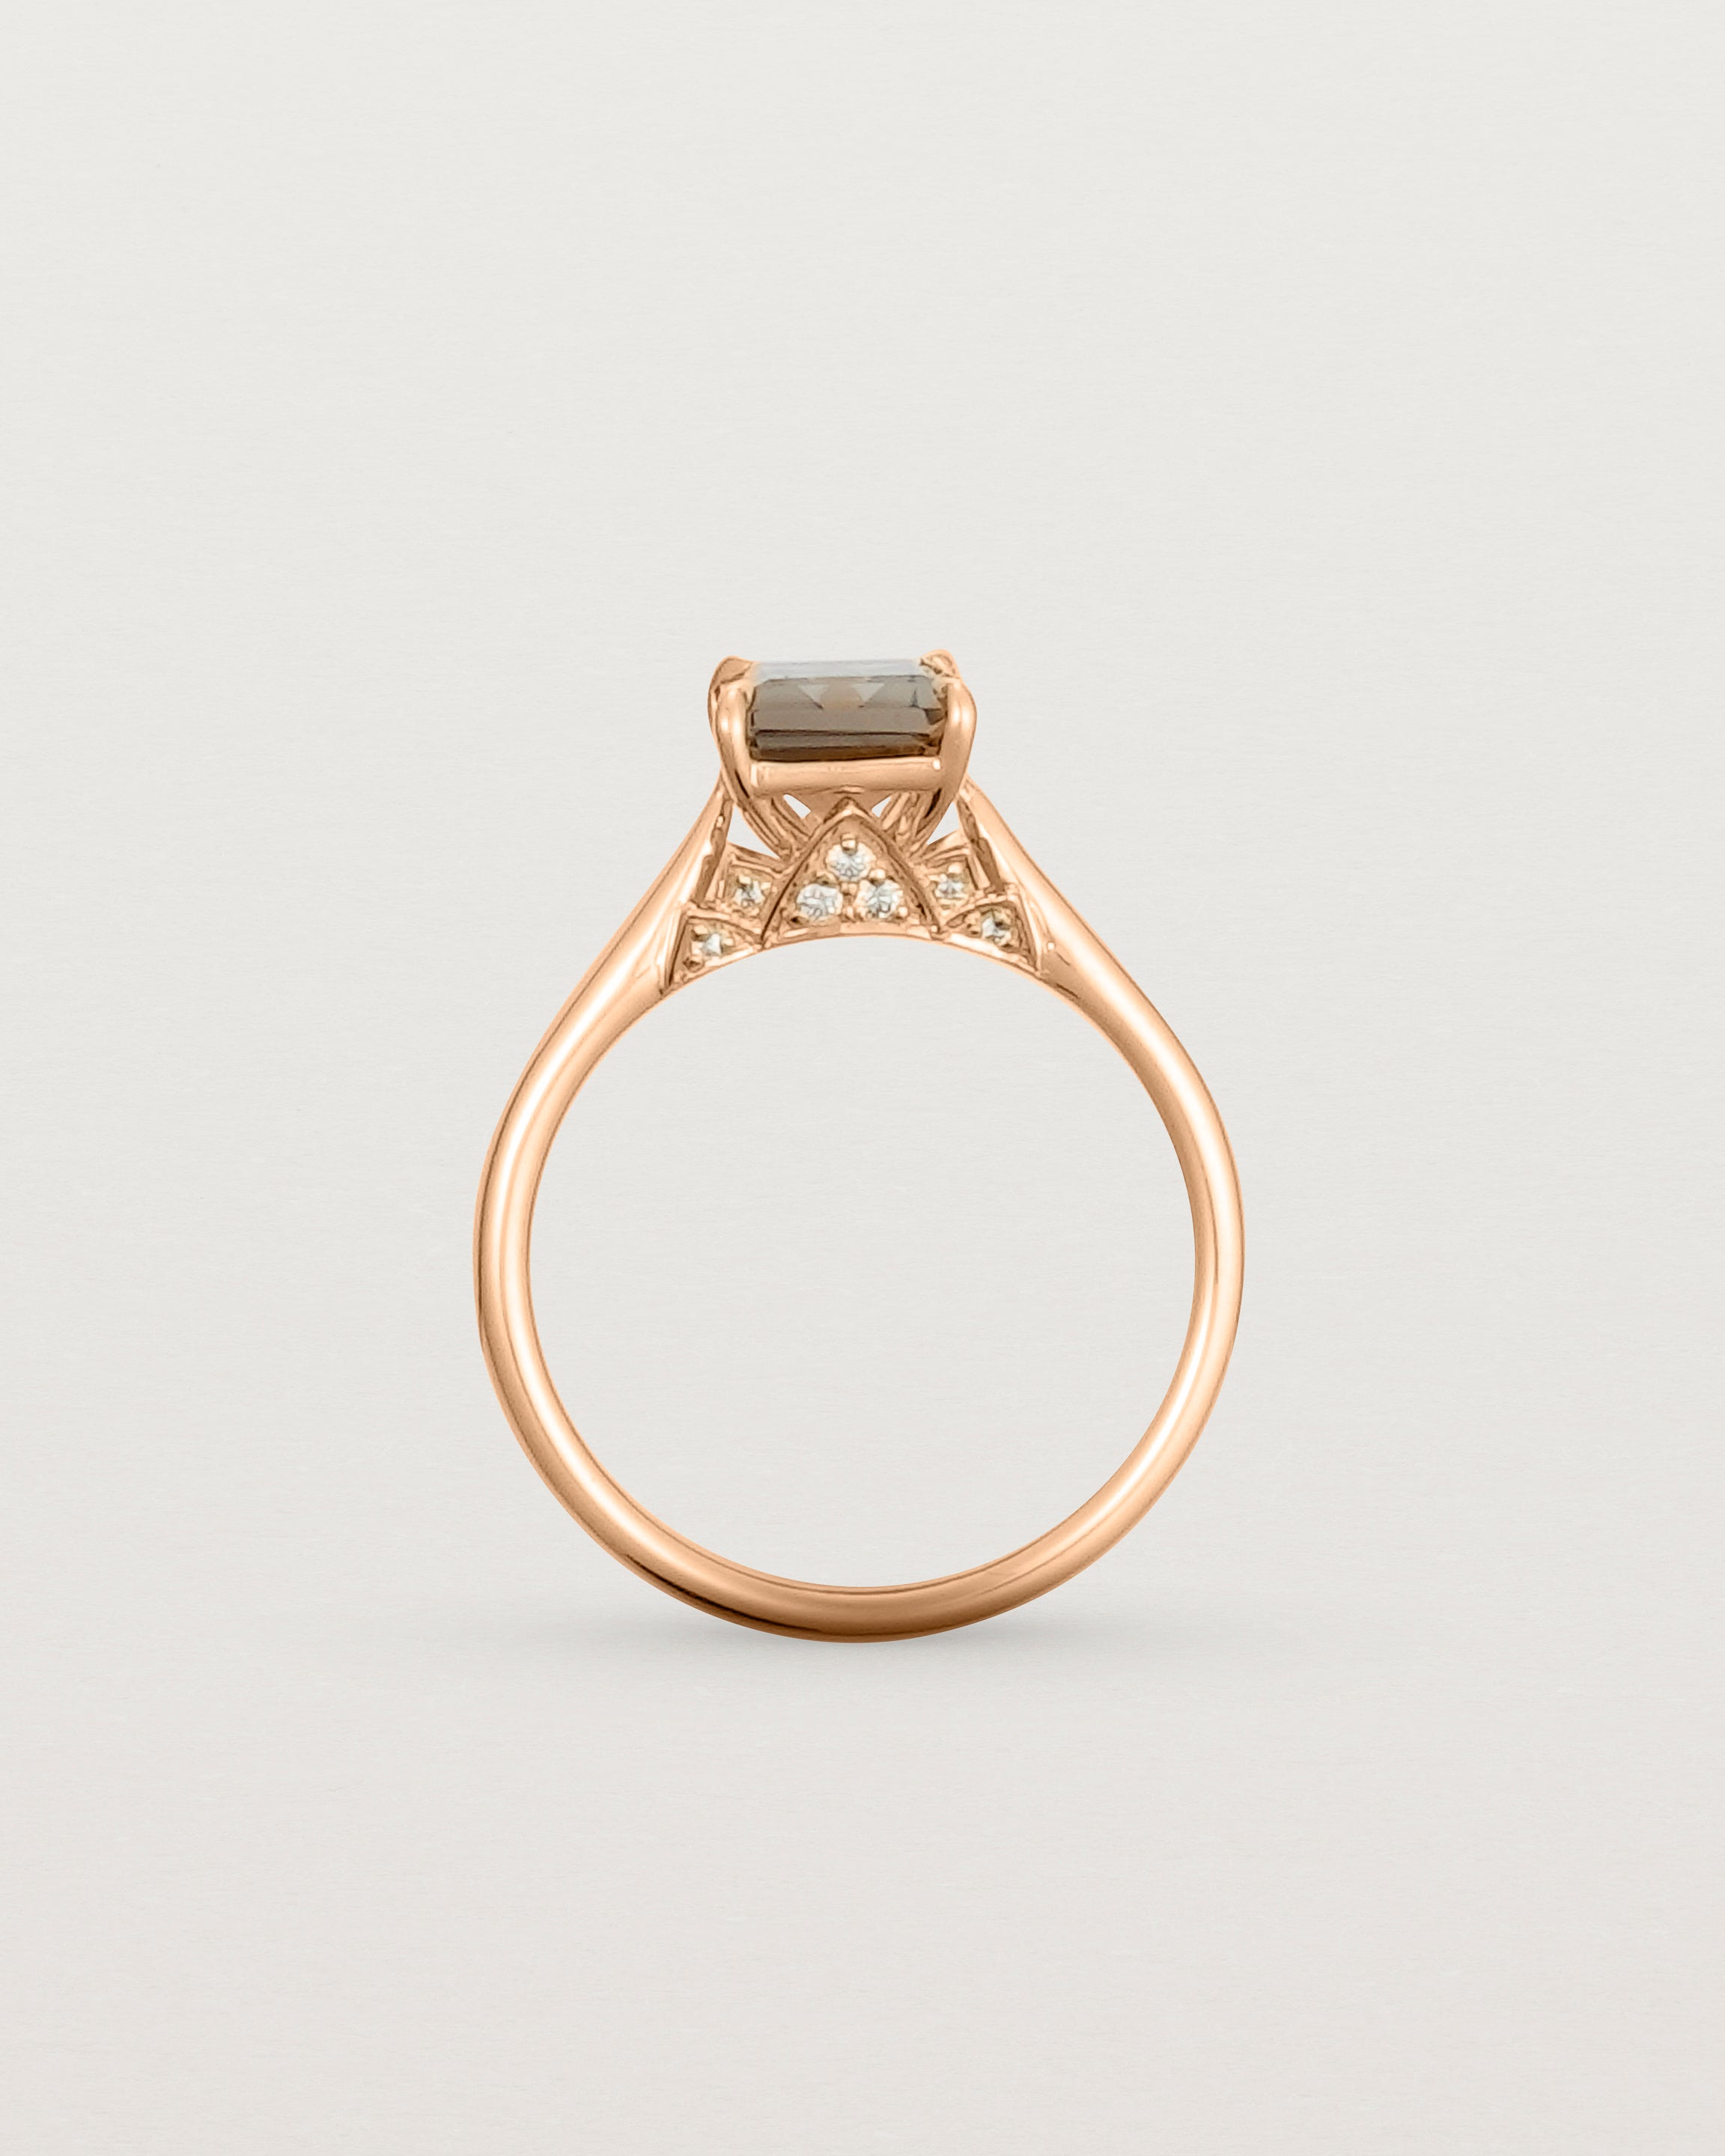 Standing view of the Kalina Emerald Solitaire | Smokey Quartz | Rose Gold.